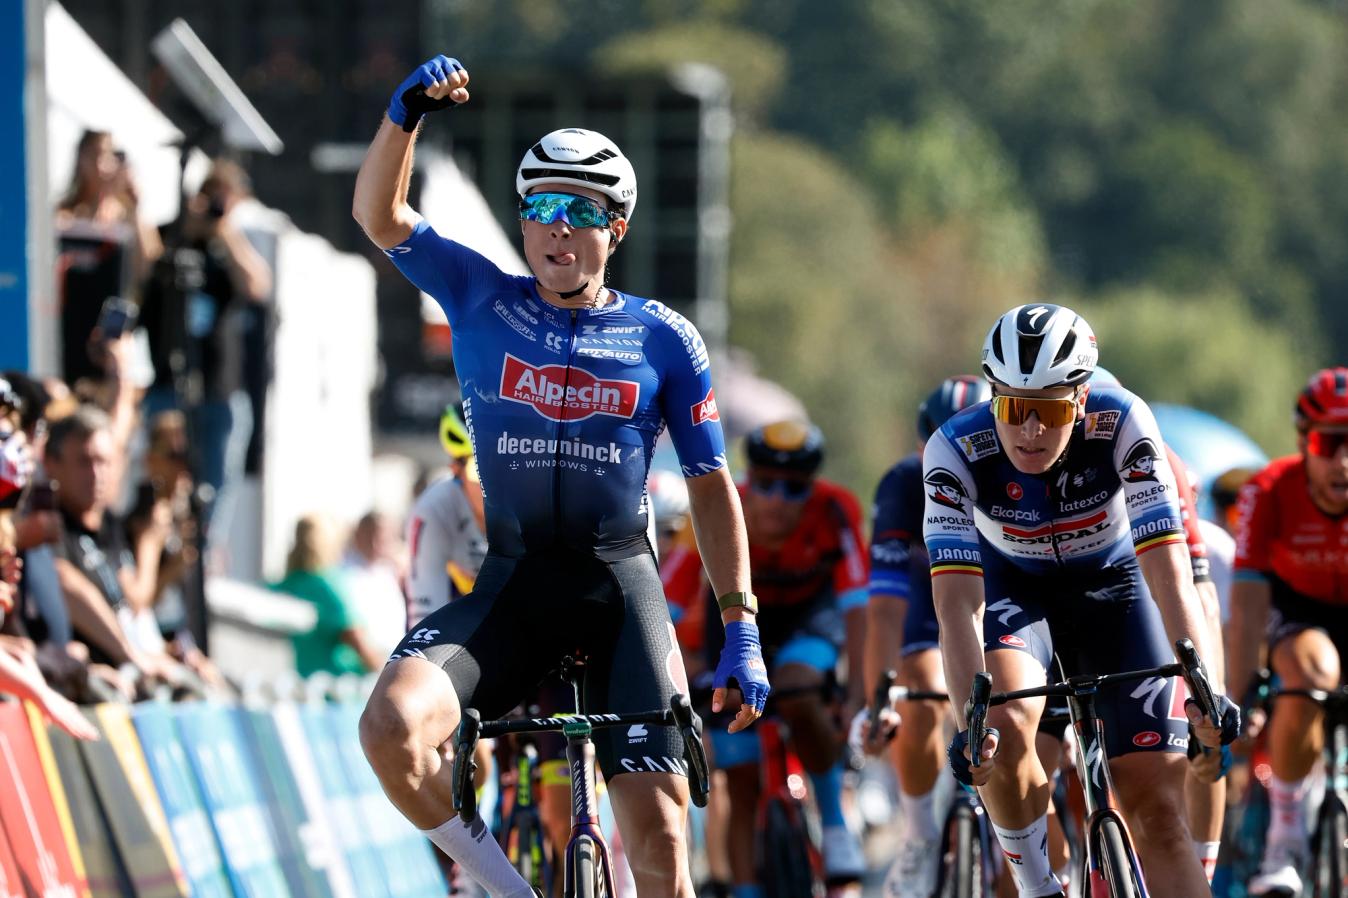 Jasper Philipsen stayed calm among the chaos to win stage 1 of the Renewi Tour